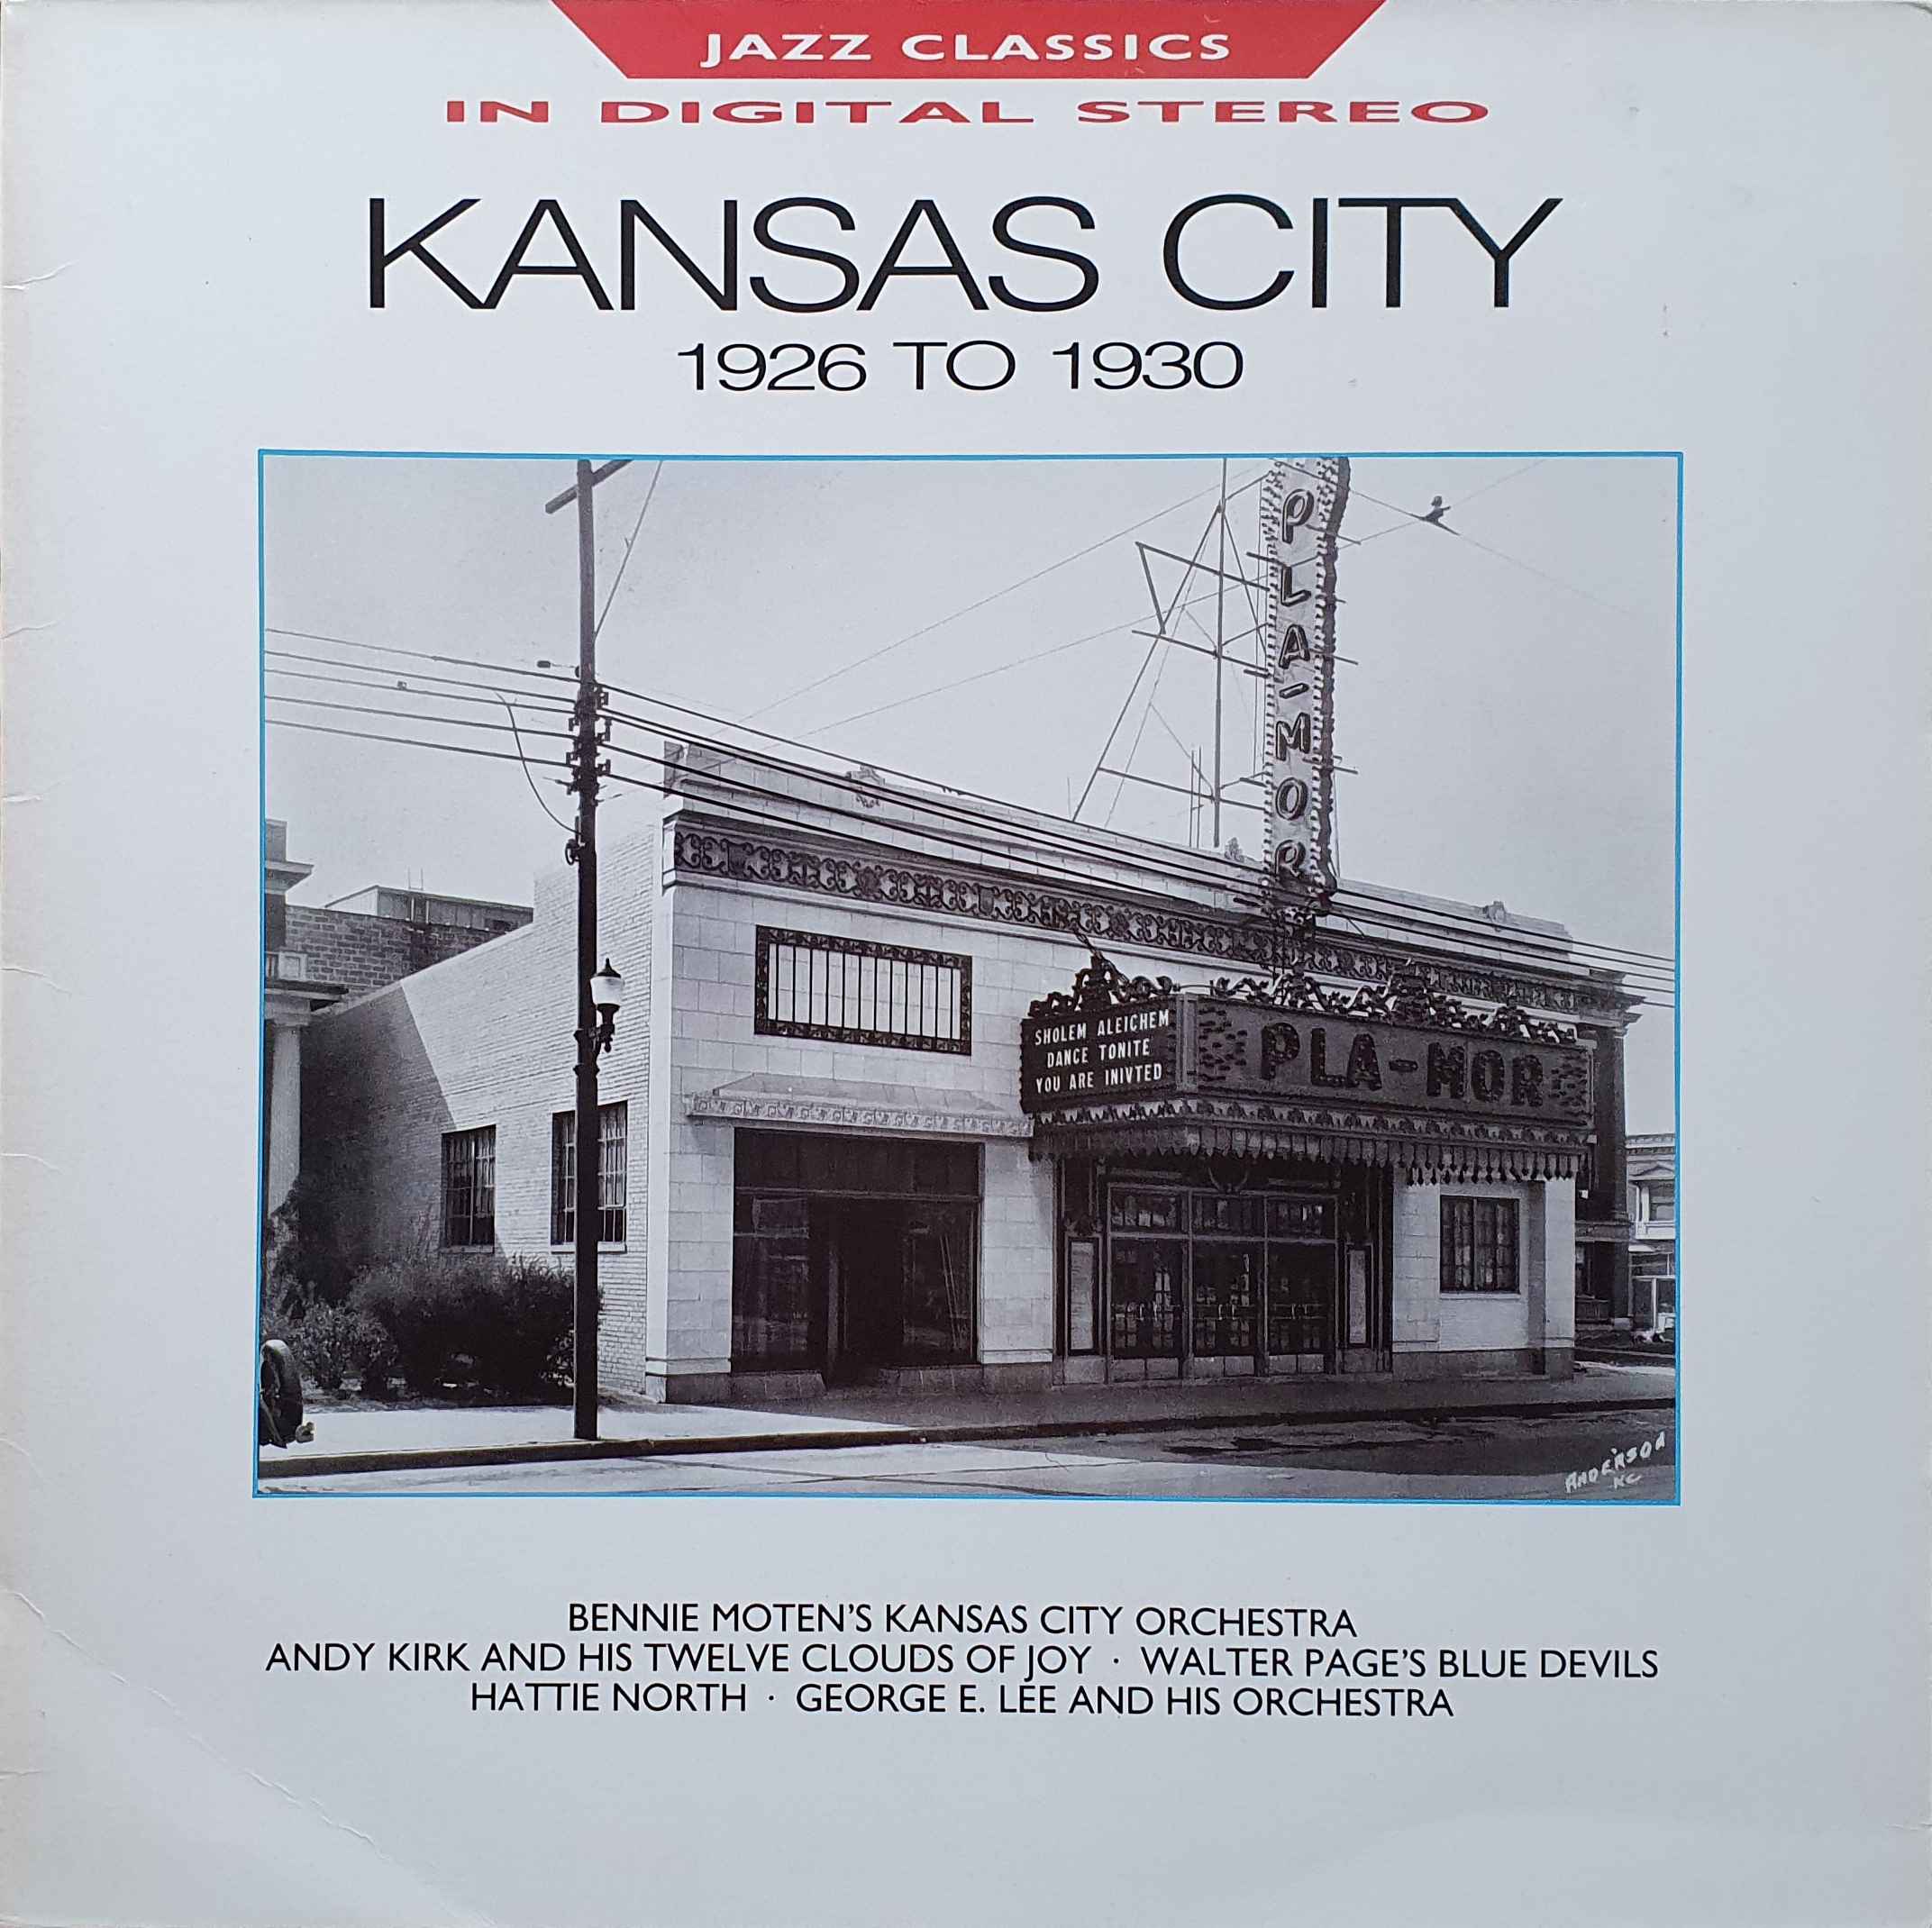 Picture of REB 691 Jazz classics - Kansas City 1926 - 1930 by artist Various from the BBC albums - Records and Tapes library